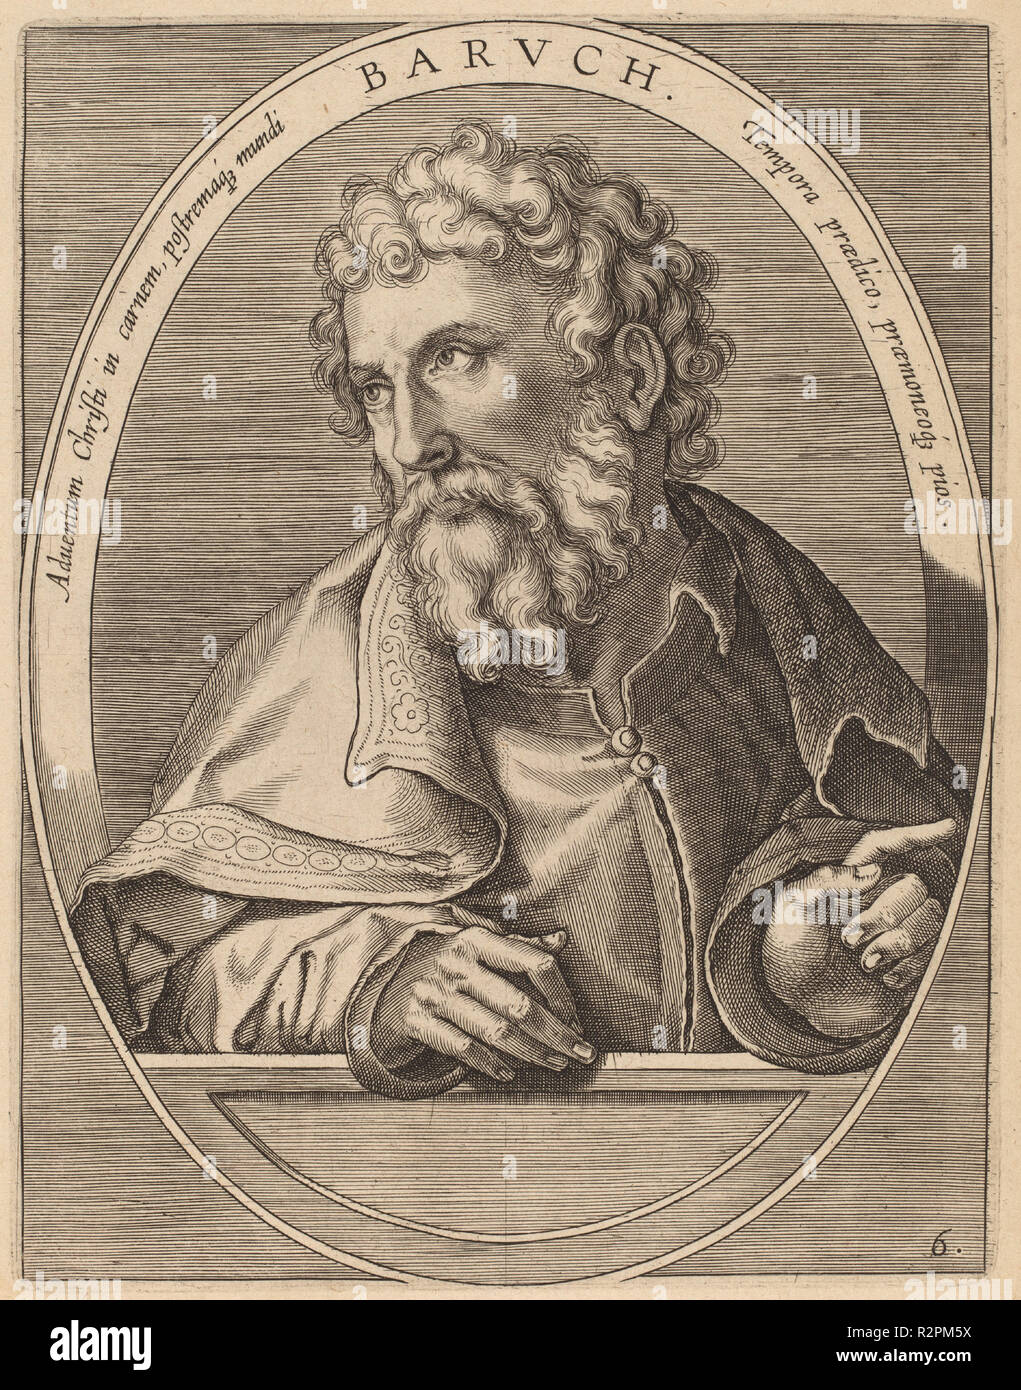 Baruch. Dated: published 1613. Dimensions: plate: 17.7 x 13.7 cm (6 15/16 x 5 3/8 in.)  sheet: 24.3 x 19 cm (9 9/16 x 7 1/2 in.). Medium: engraving on laid paper. Museum: National Gallery of Art, Washington DC. Author: Theodor Galle after Jan van der Straet. Stock Photo